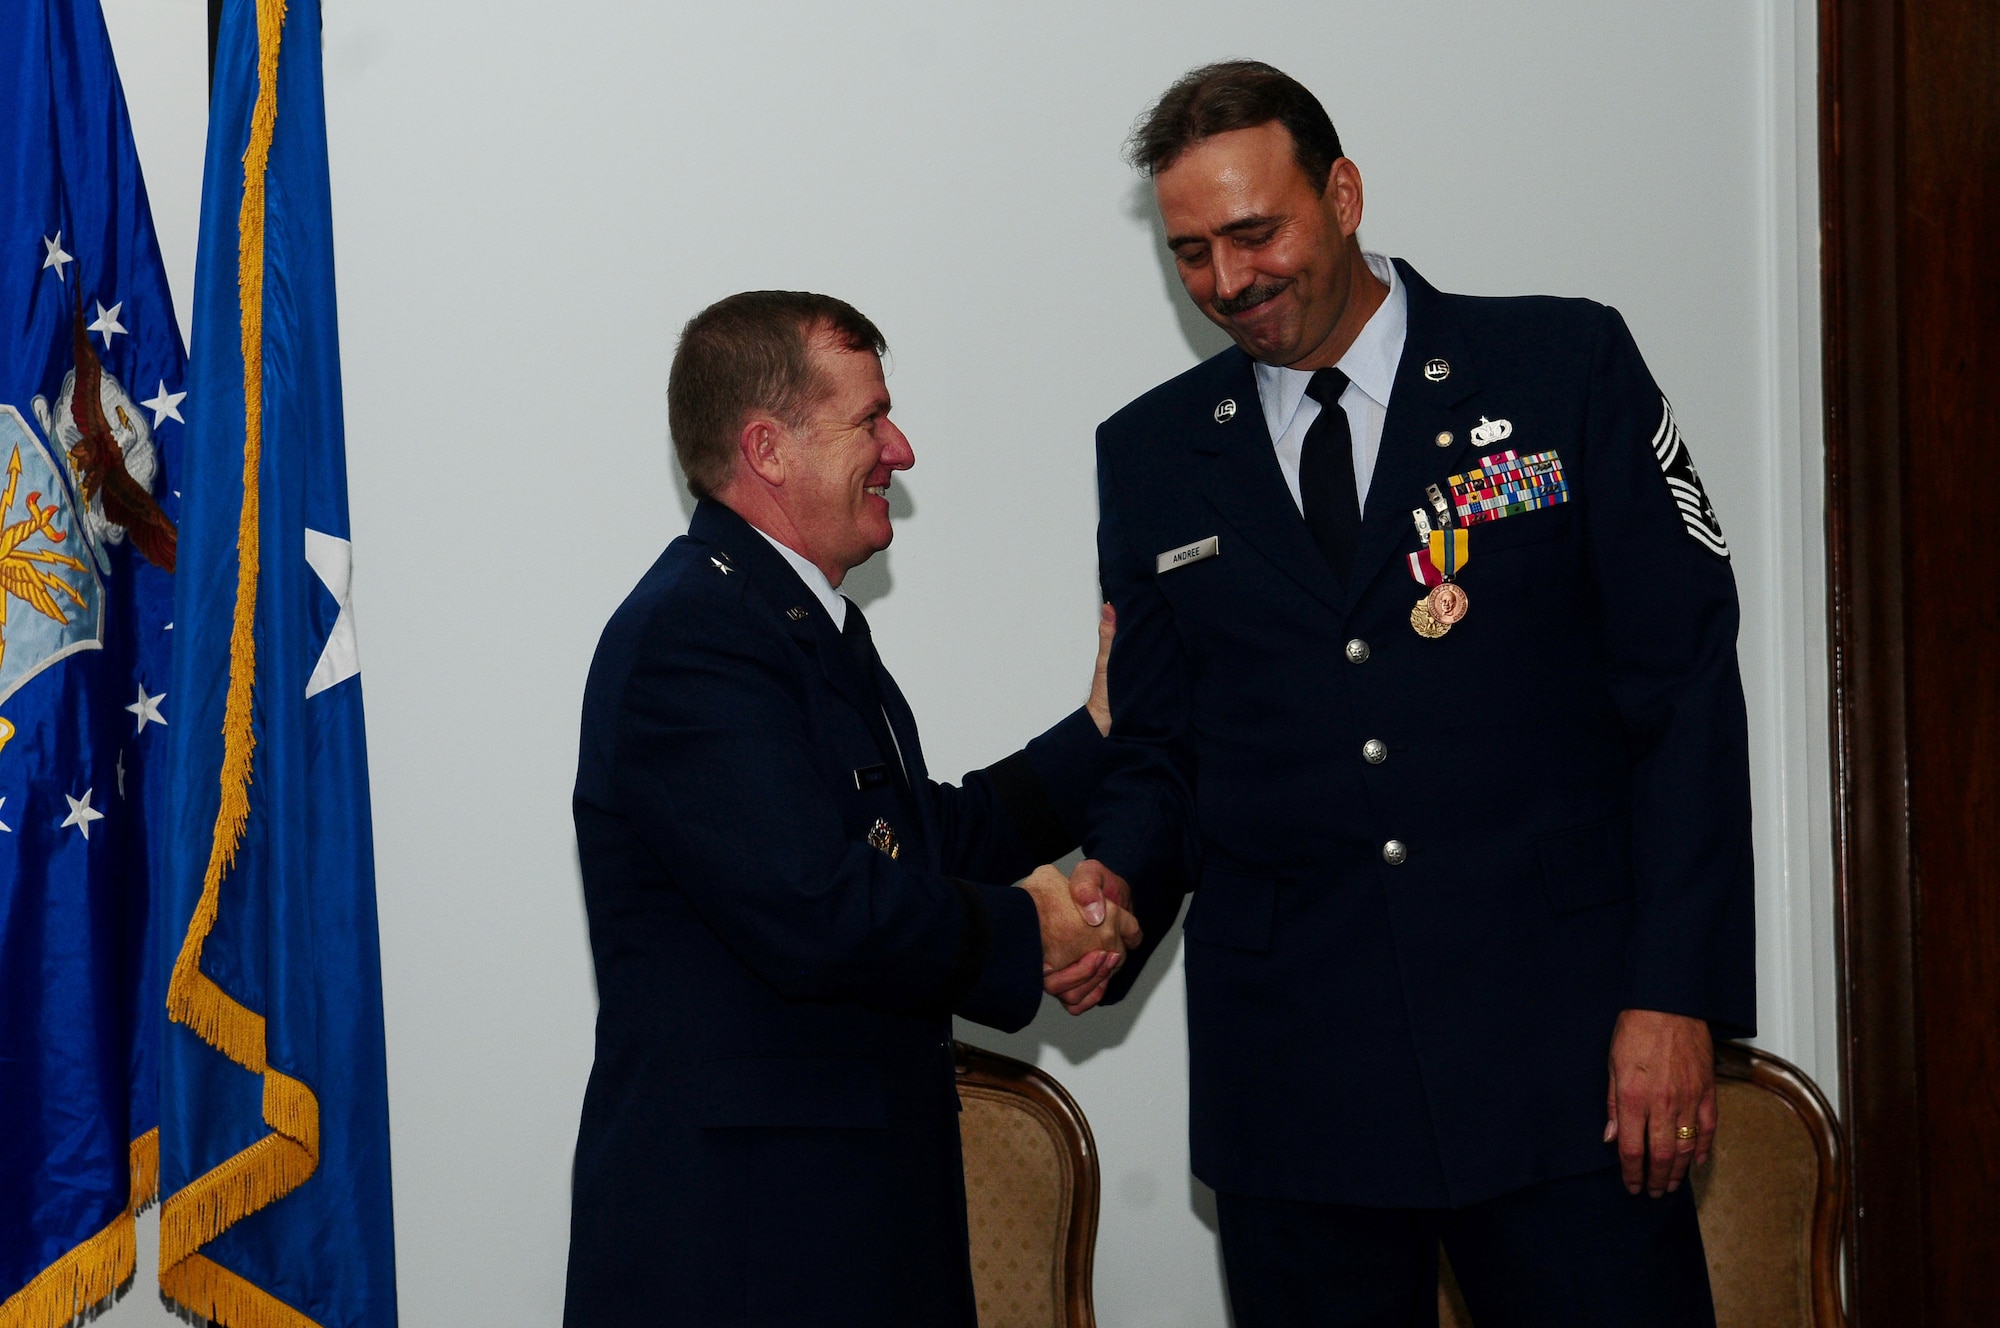 ANDERSEN AIR FORCE BASE Guam:  Gen. Phil Ruhlman, 36th Wing commander,  congratulates 36th Wing Command Chief Master Sergeant Saniford D. "Bud" Andree, Jr., on his career and achievements during a retirement ceremony,Jan. 8 at the Sunrise Conference Center. Before retiring, Chief Andree hands over the reins of command chief ofthe 36th Wing to Chief Master Sgt. Allen Mullinex. (U.S. Air Force photo by Airman 1st Class Jeffrey Schultze)